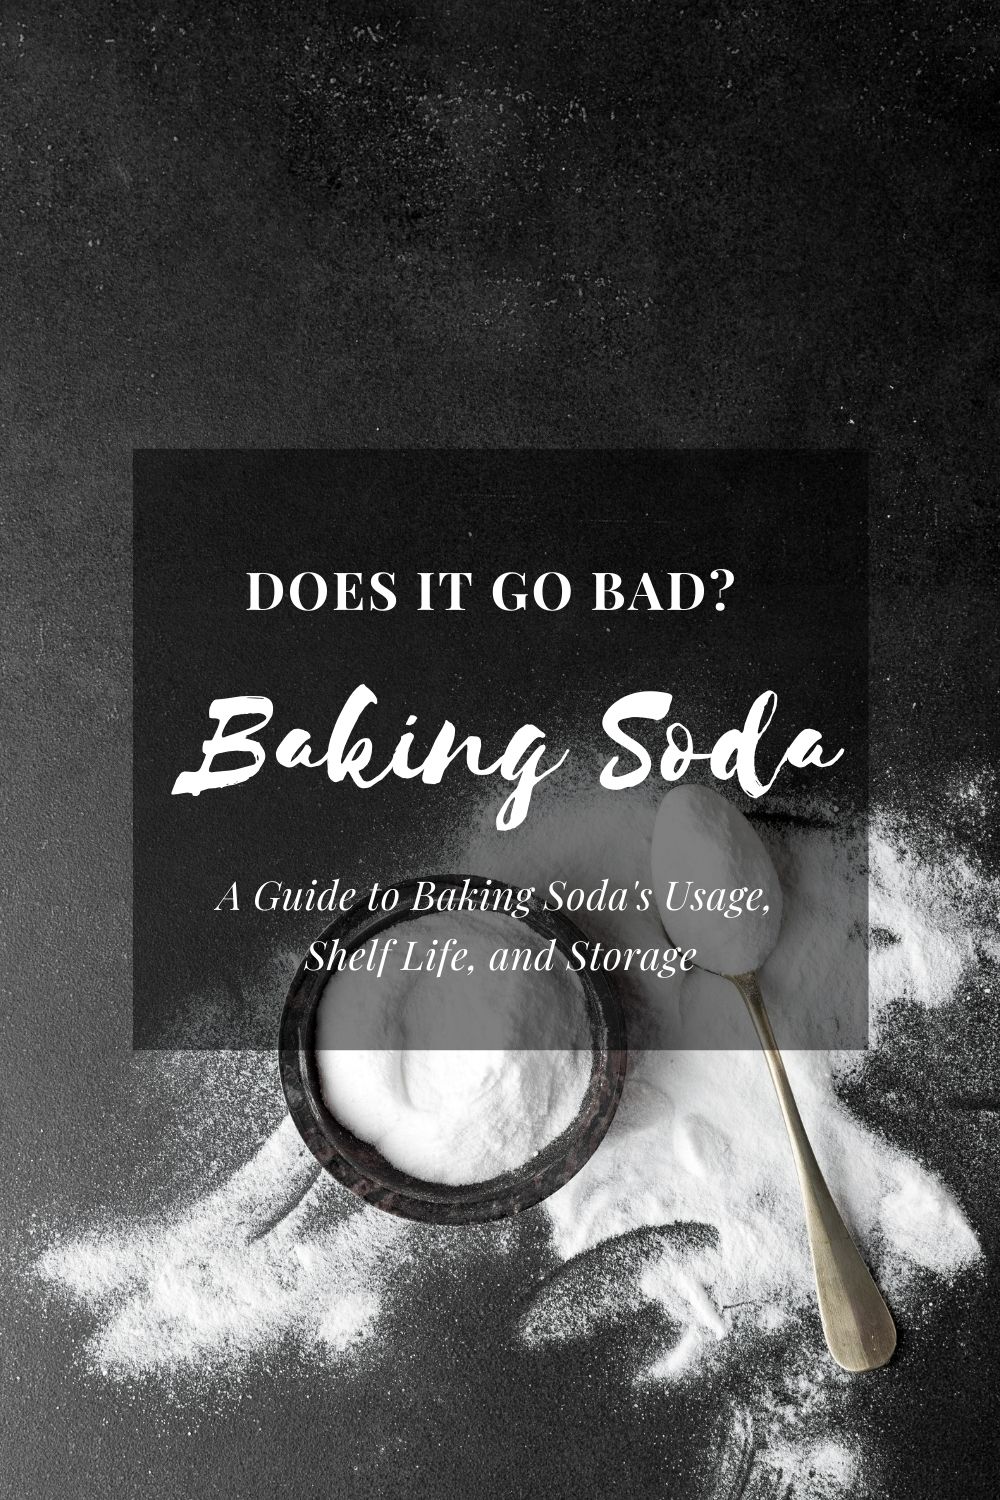 Does Baking Soda Go Bad: A Guide to Baking Soda's Usage, Shelf Life, And Storage